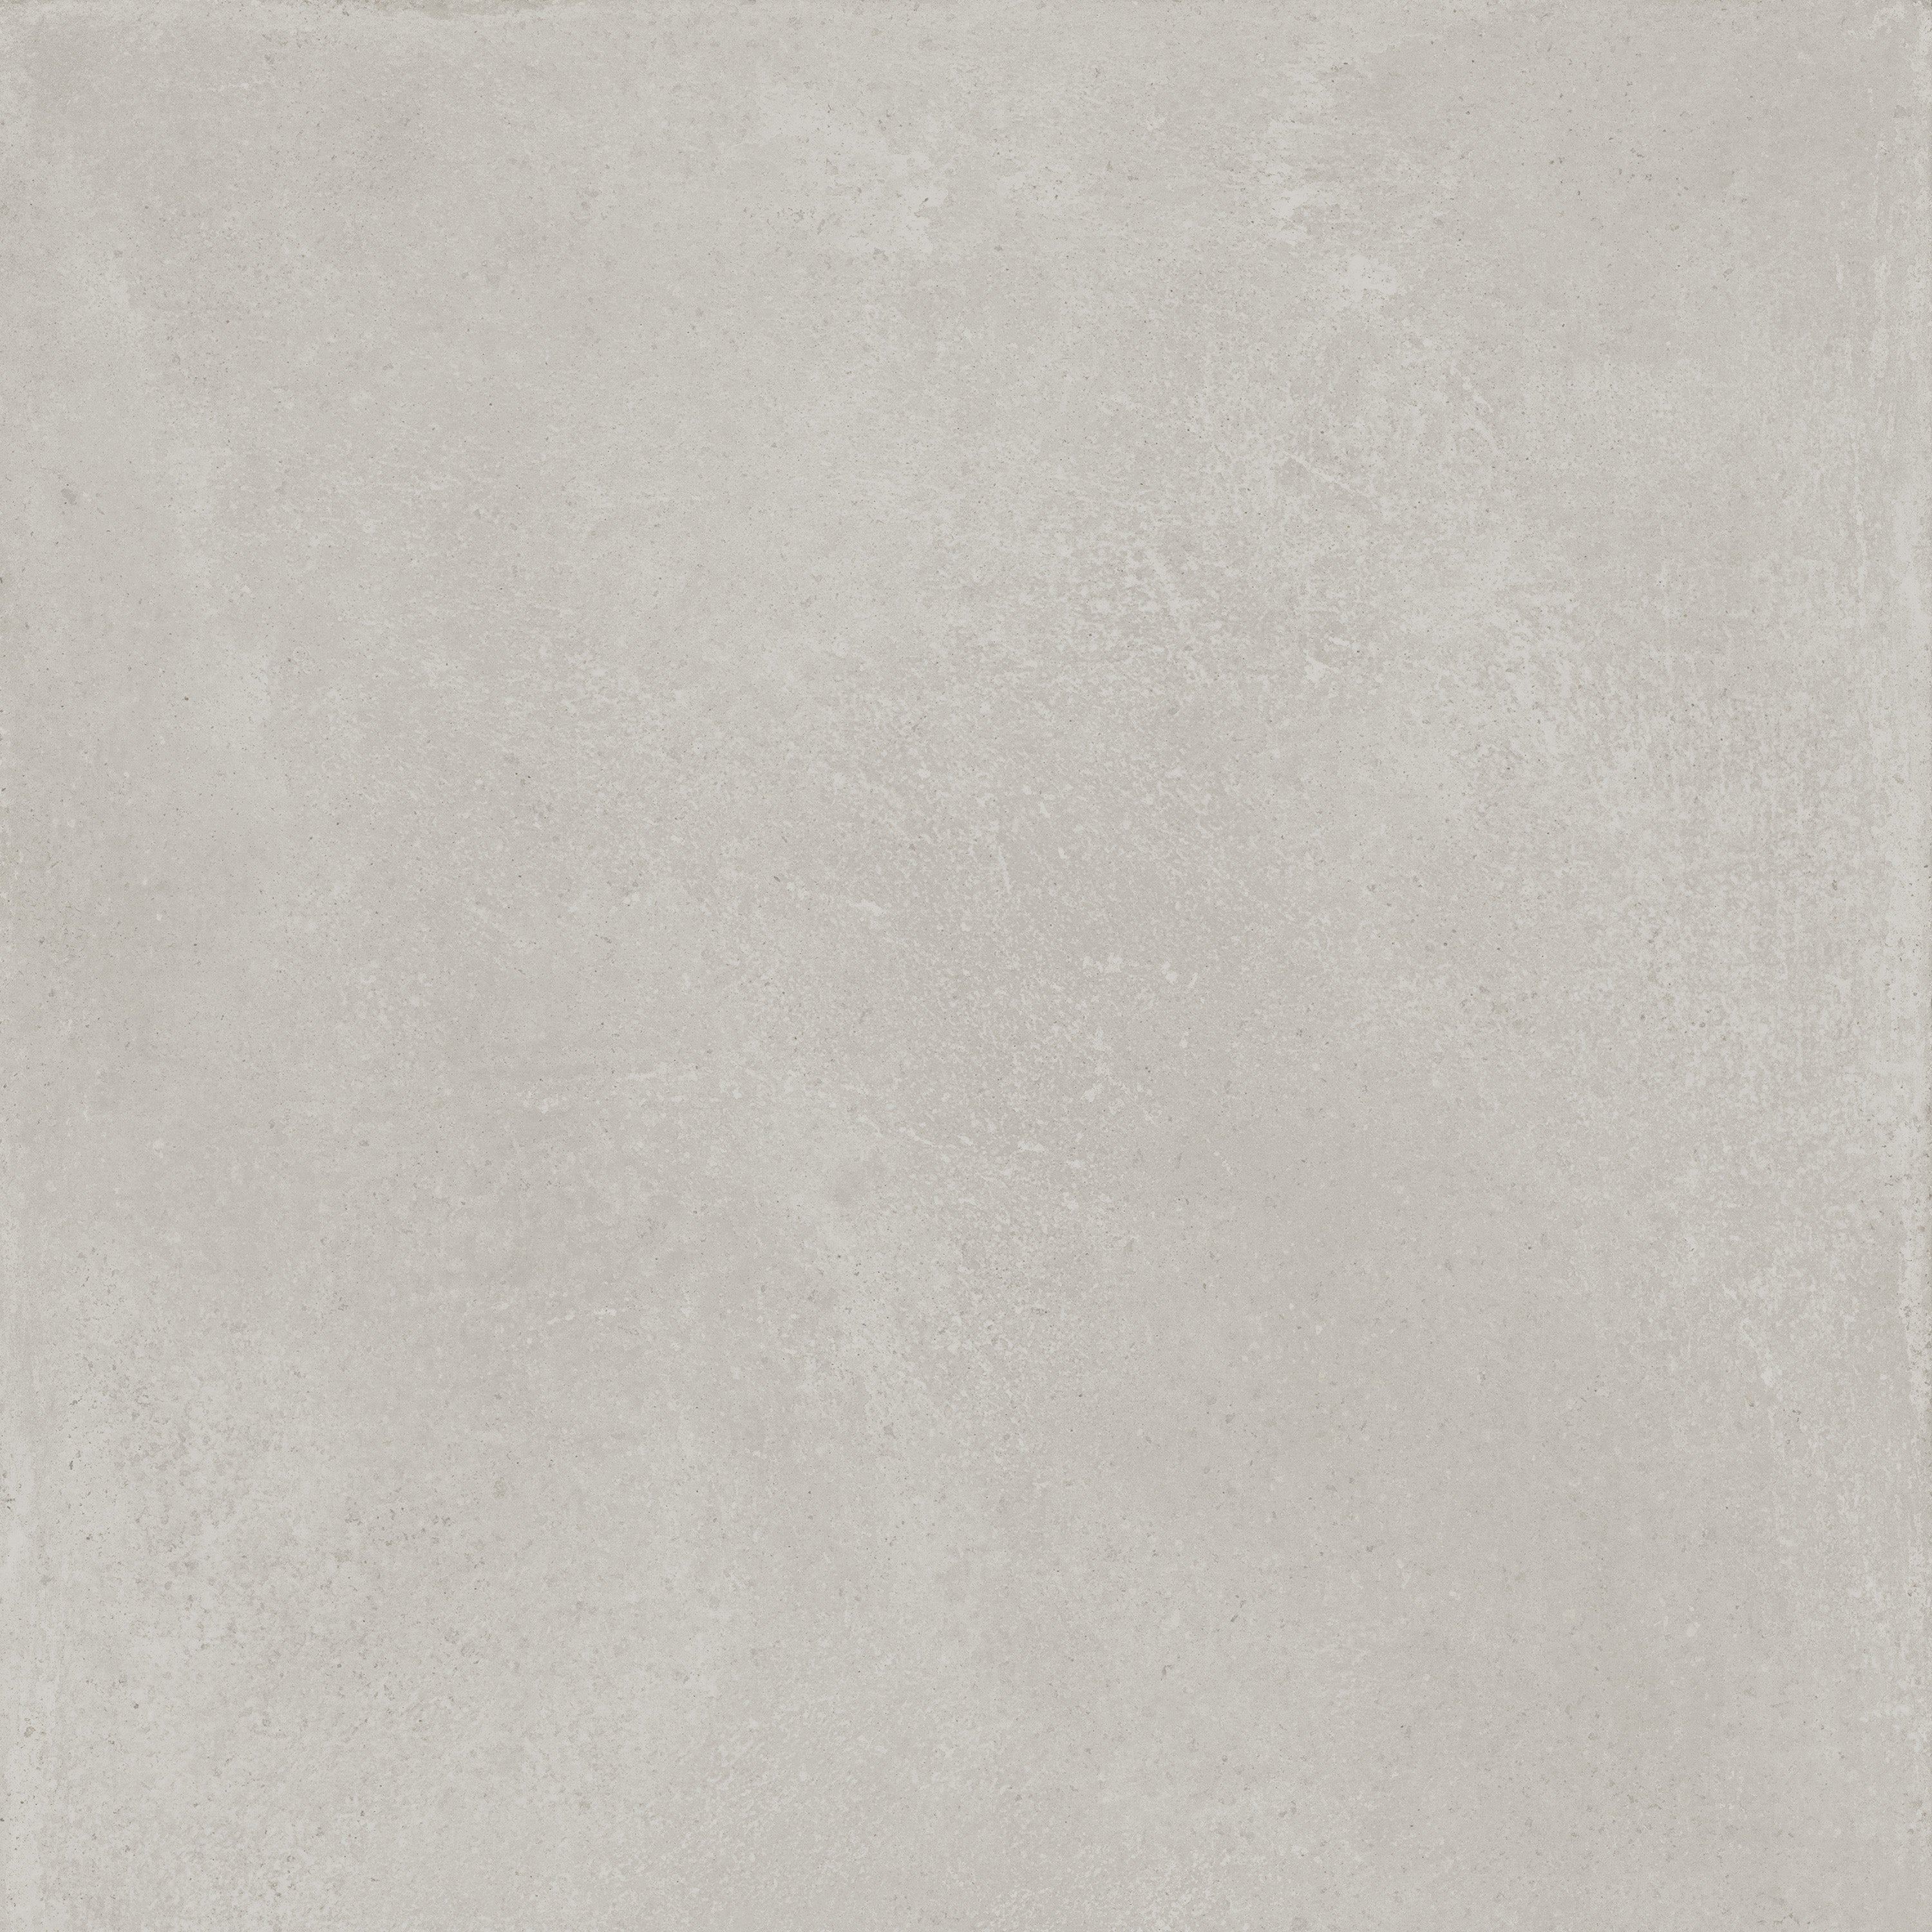 landmark frontier20 concrete passion silver paver tile 24x24x20mm matte rectified porcelain tile distributed by surface group international